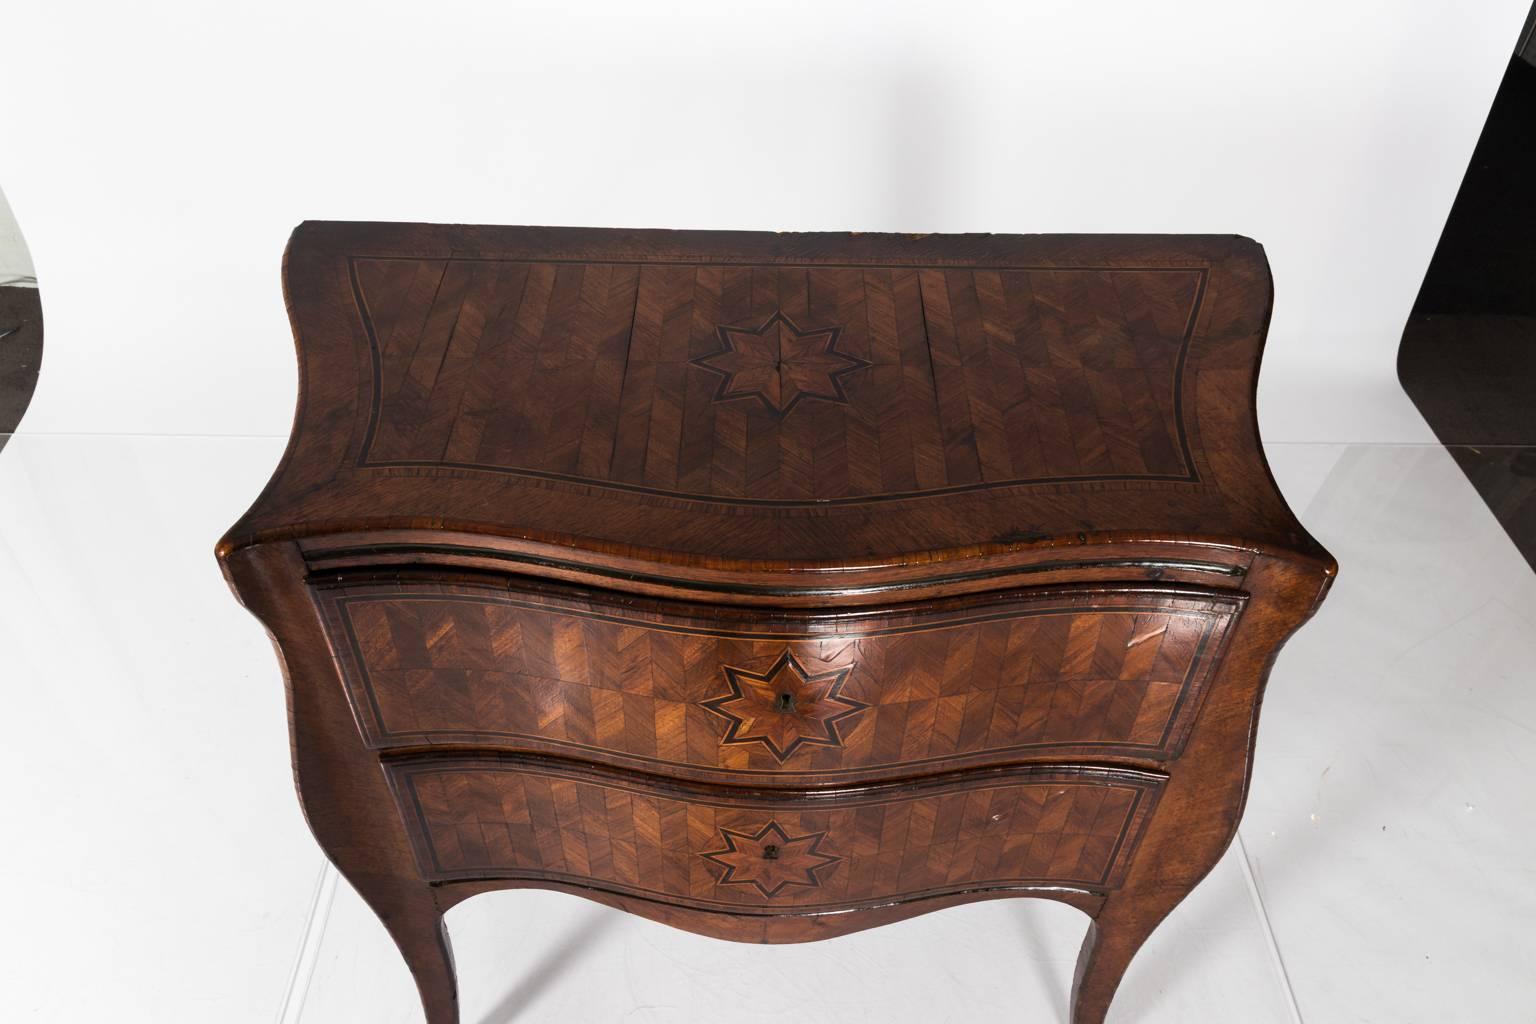 Two-drawer chest with starburst marquetry, circa 18th century.
 